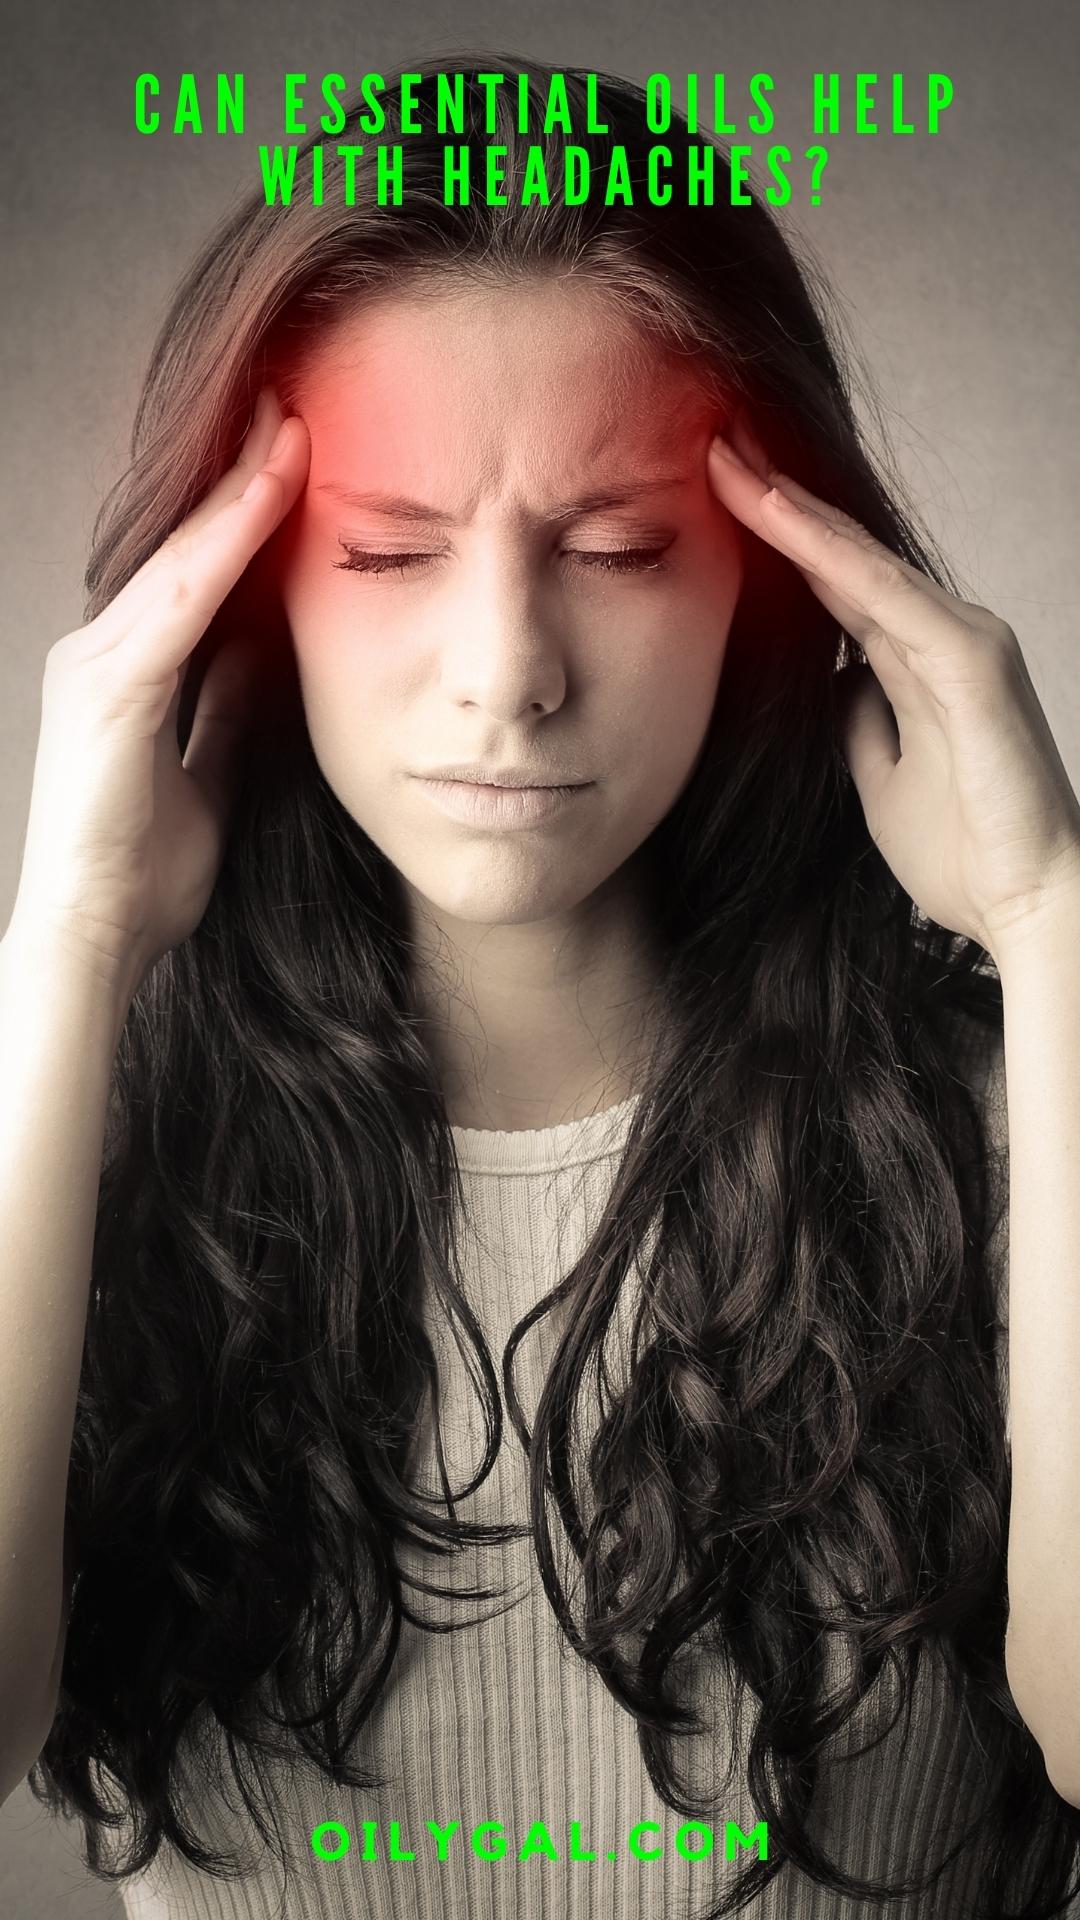 Can Essential Oils Help with Headaches